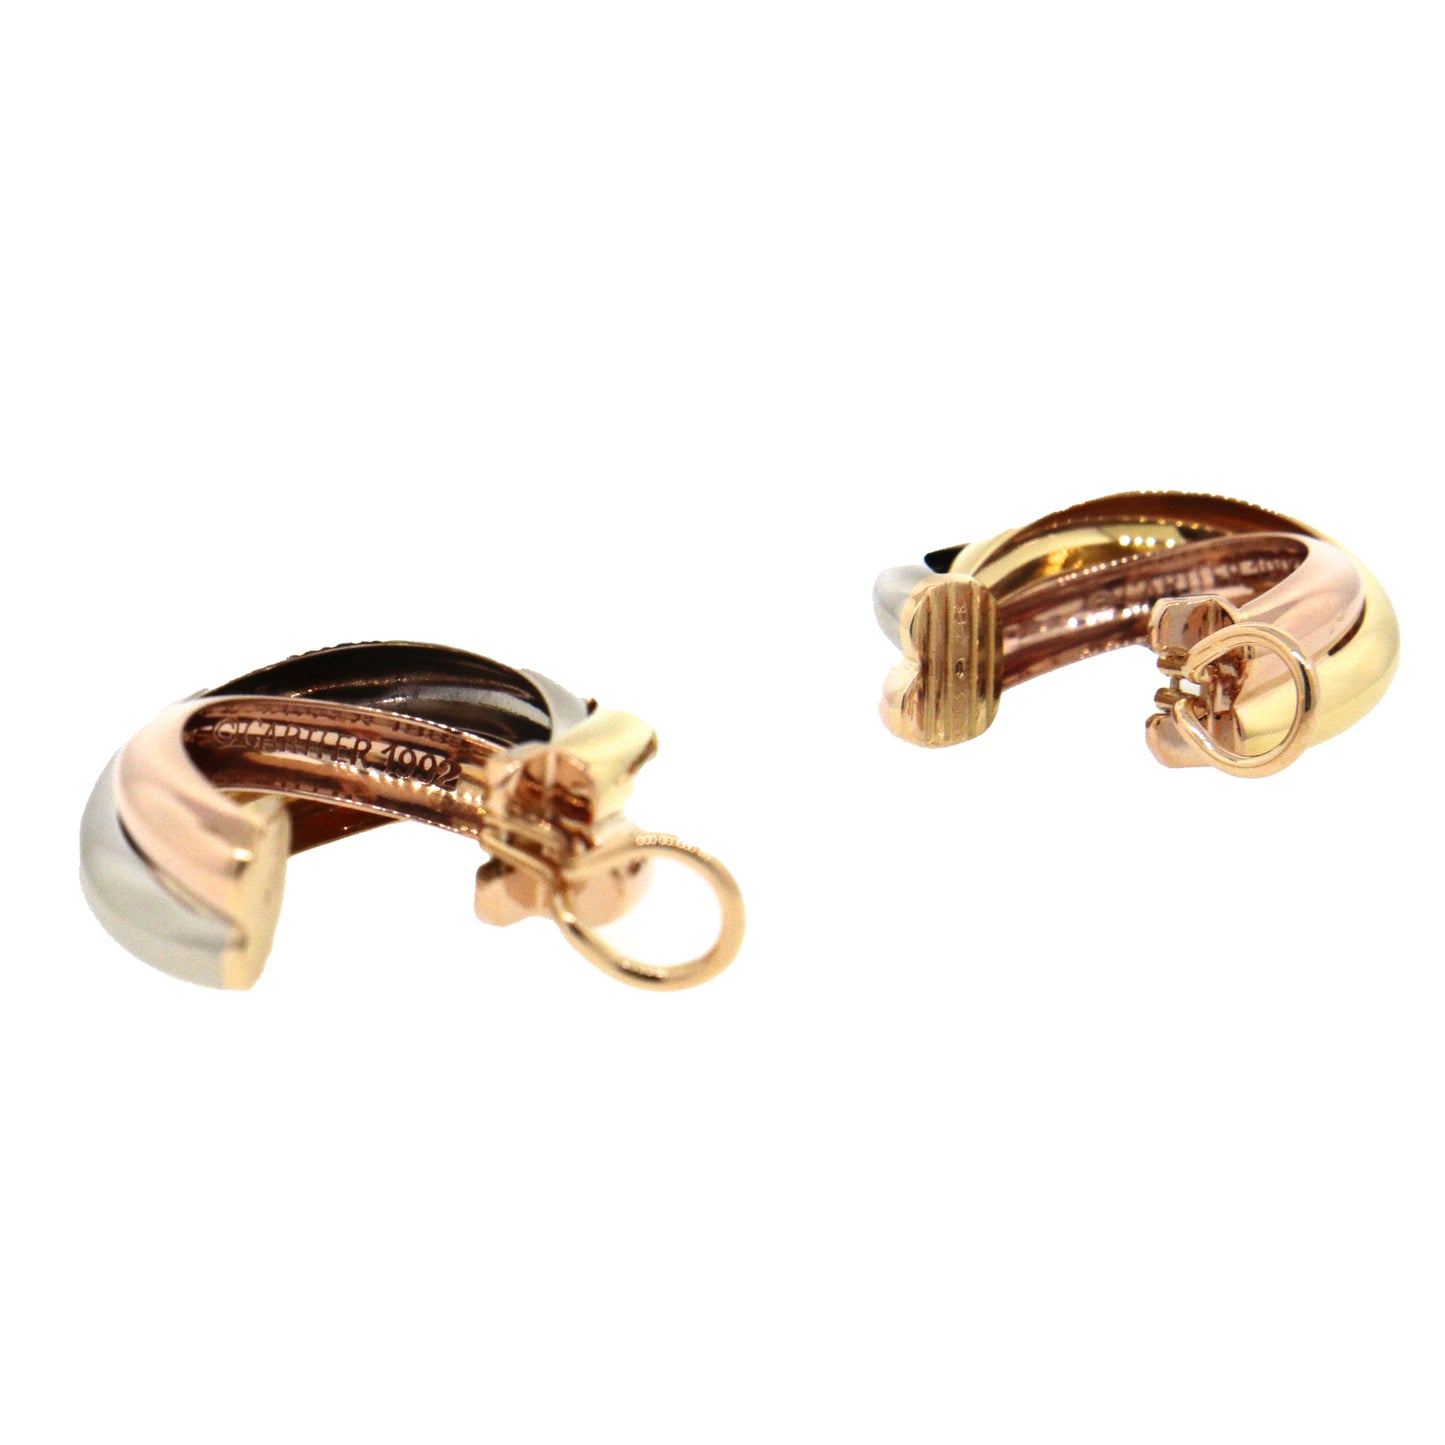 Cartier Trinity Tri-color 18k Gold Earrings